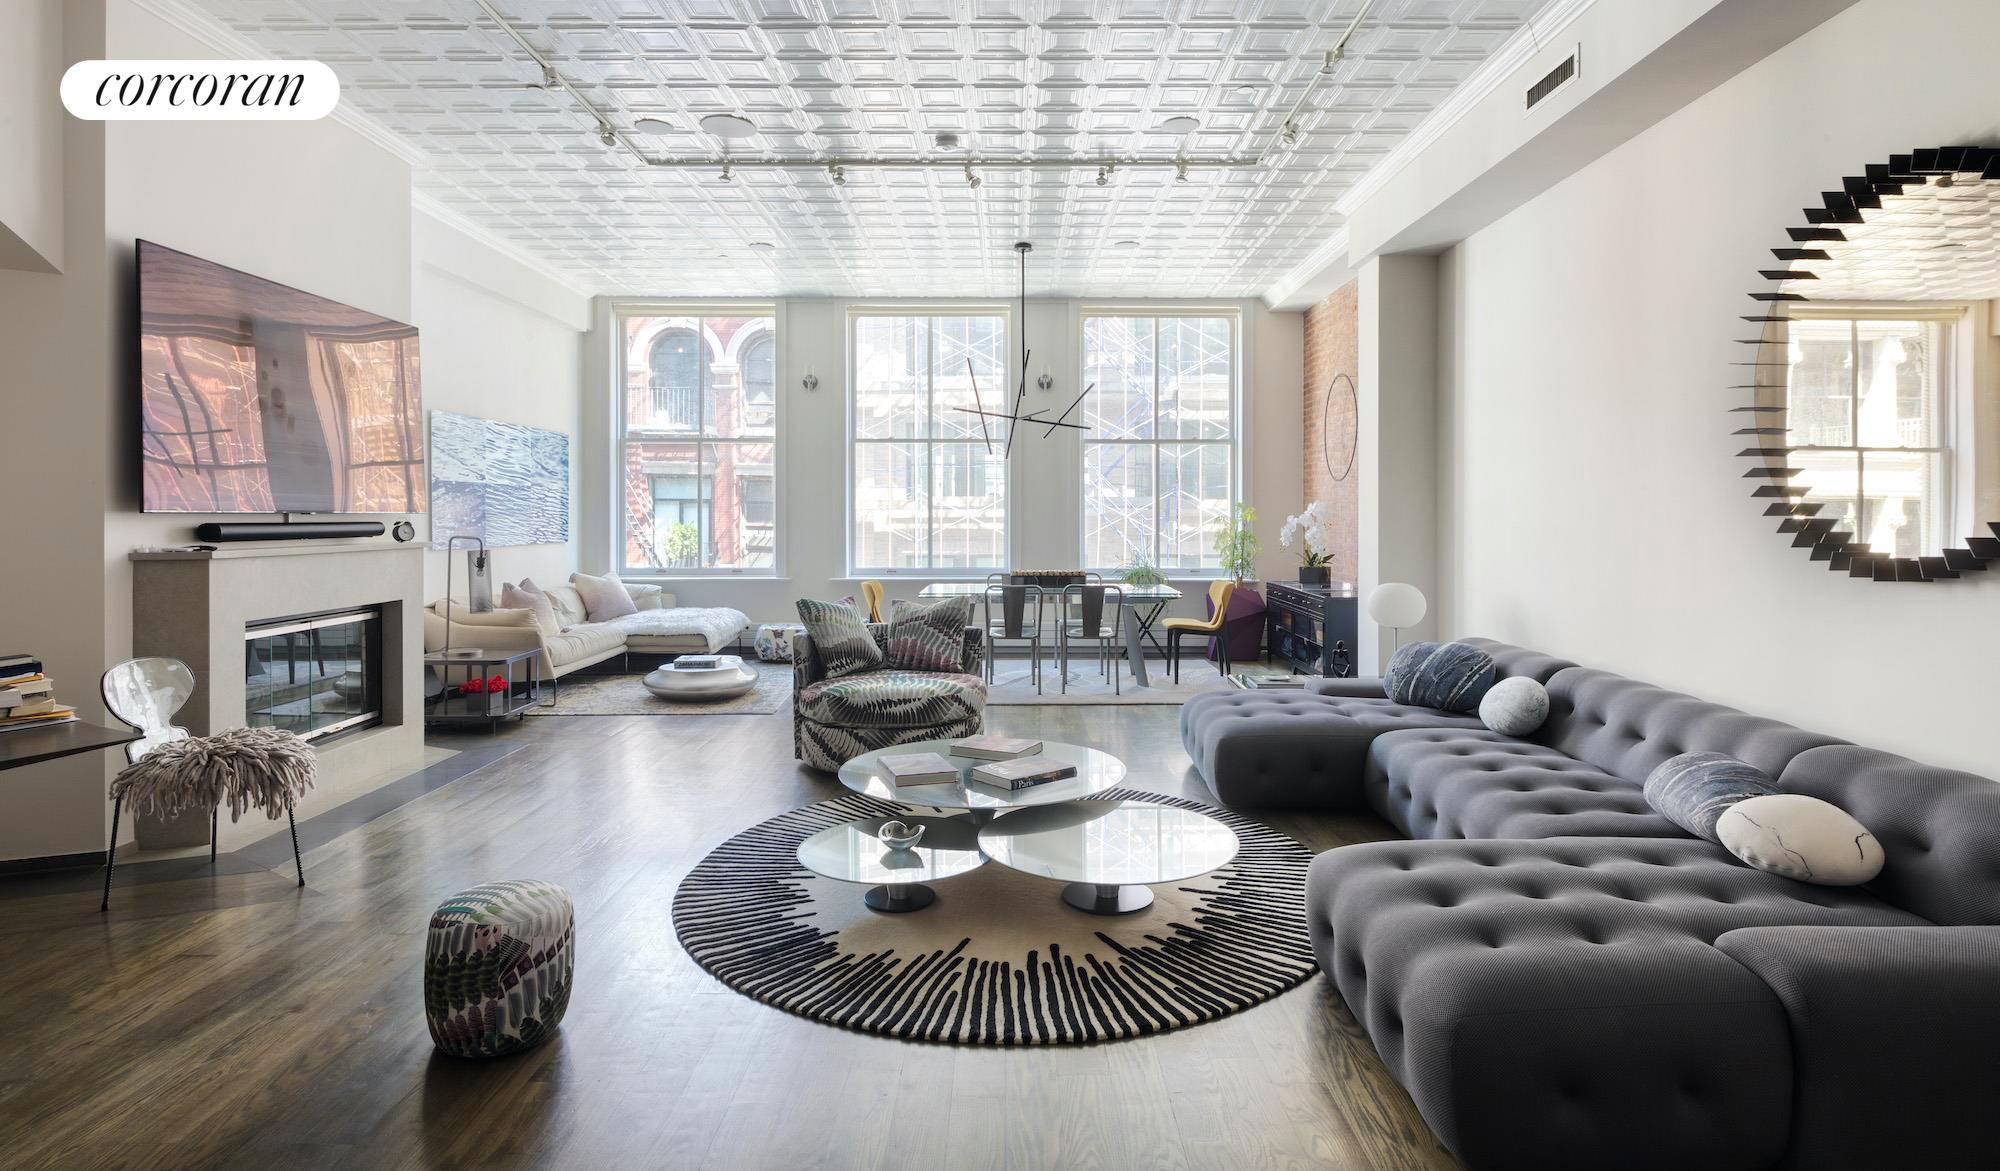 This downtown home with soaring ceilings is the definition of NYC loft living.